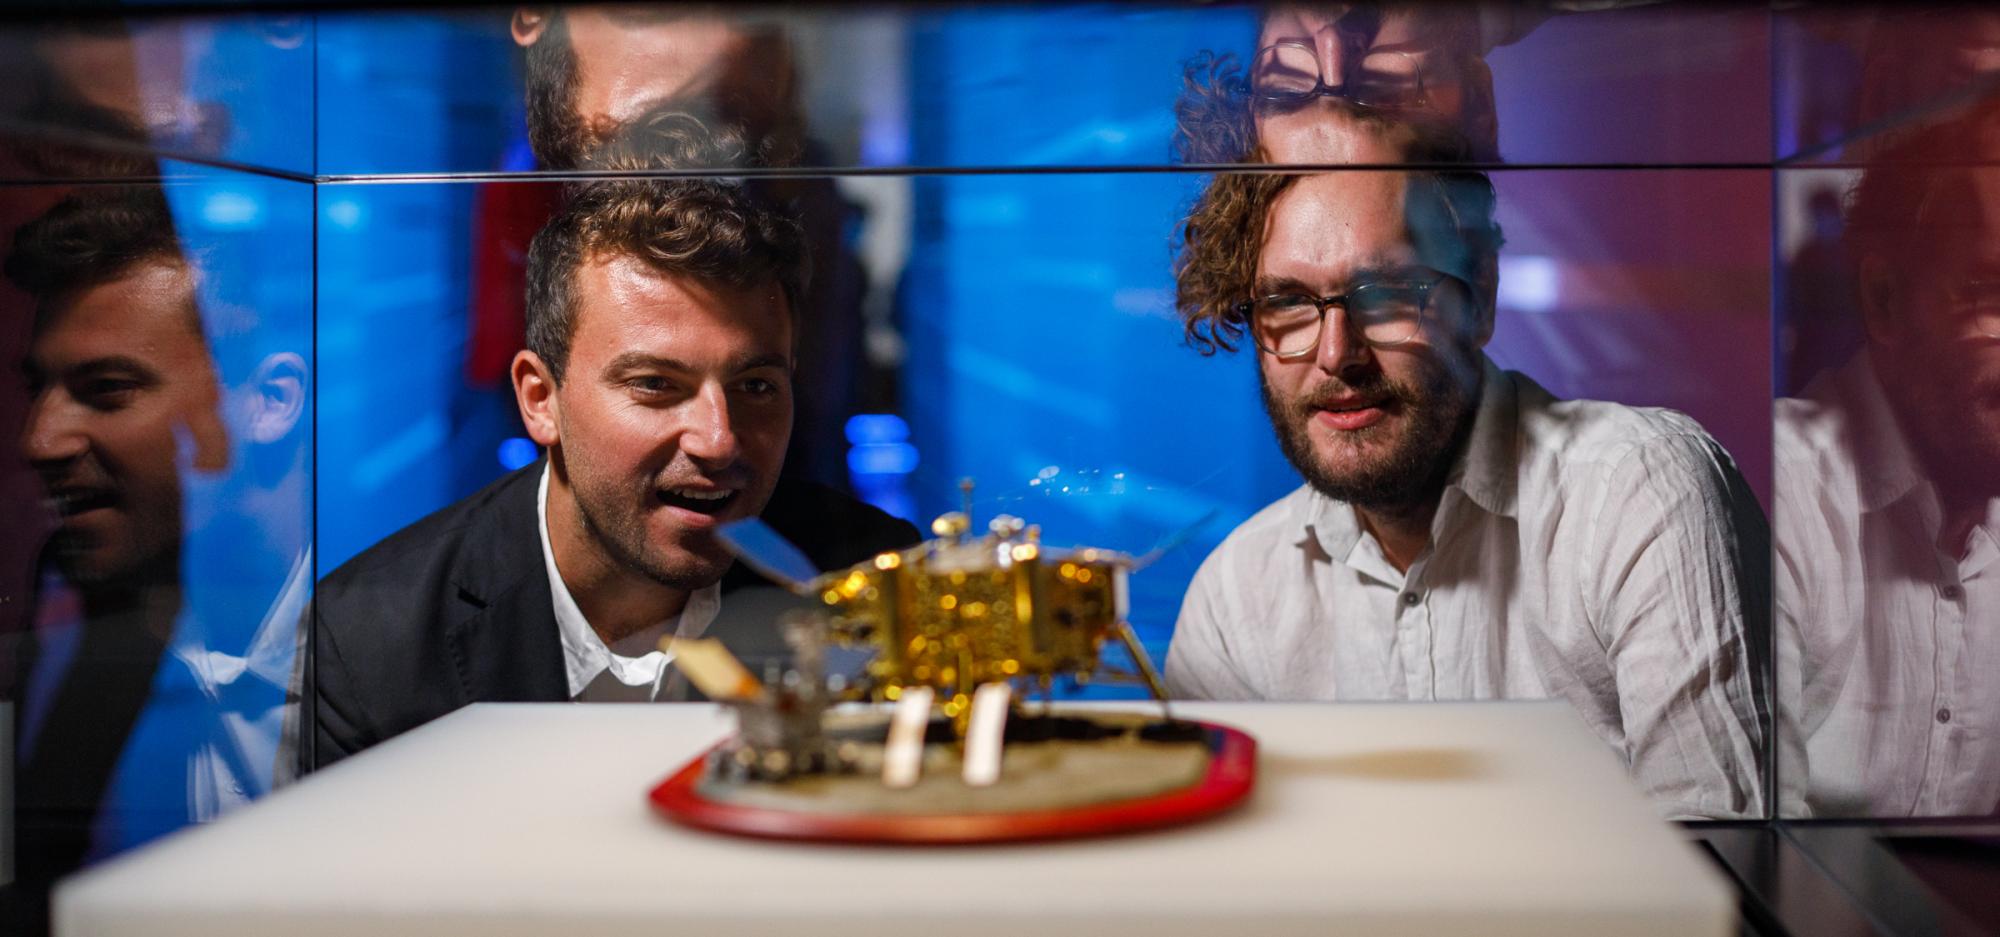 A person wearing a black suit jacket with short-cropped curly hair and a person with a white button up shirt, short hair and thin rimmed glasses stare with expressions of interest at a small gold spacecraft model in a glass Museum showcase